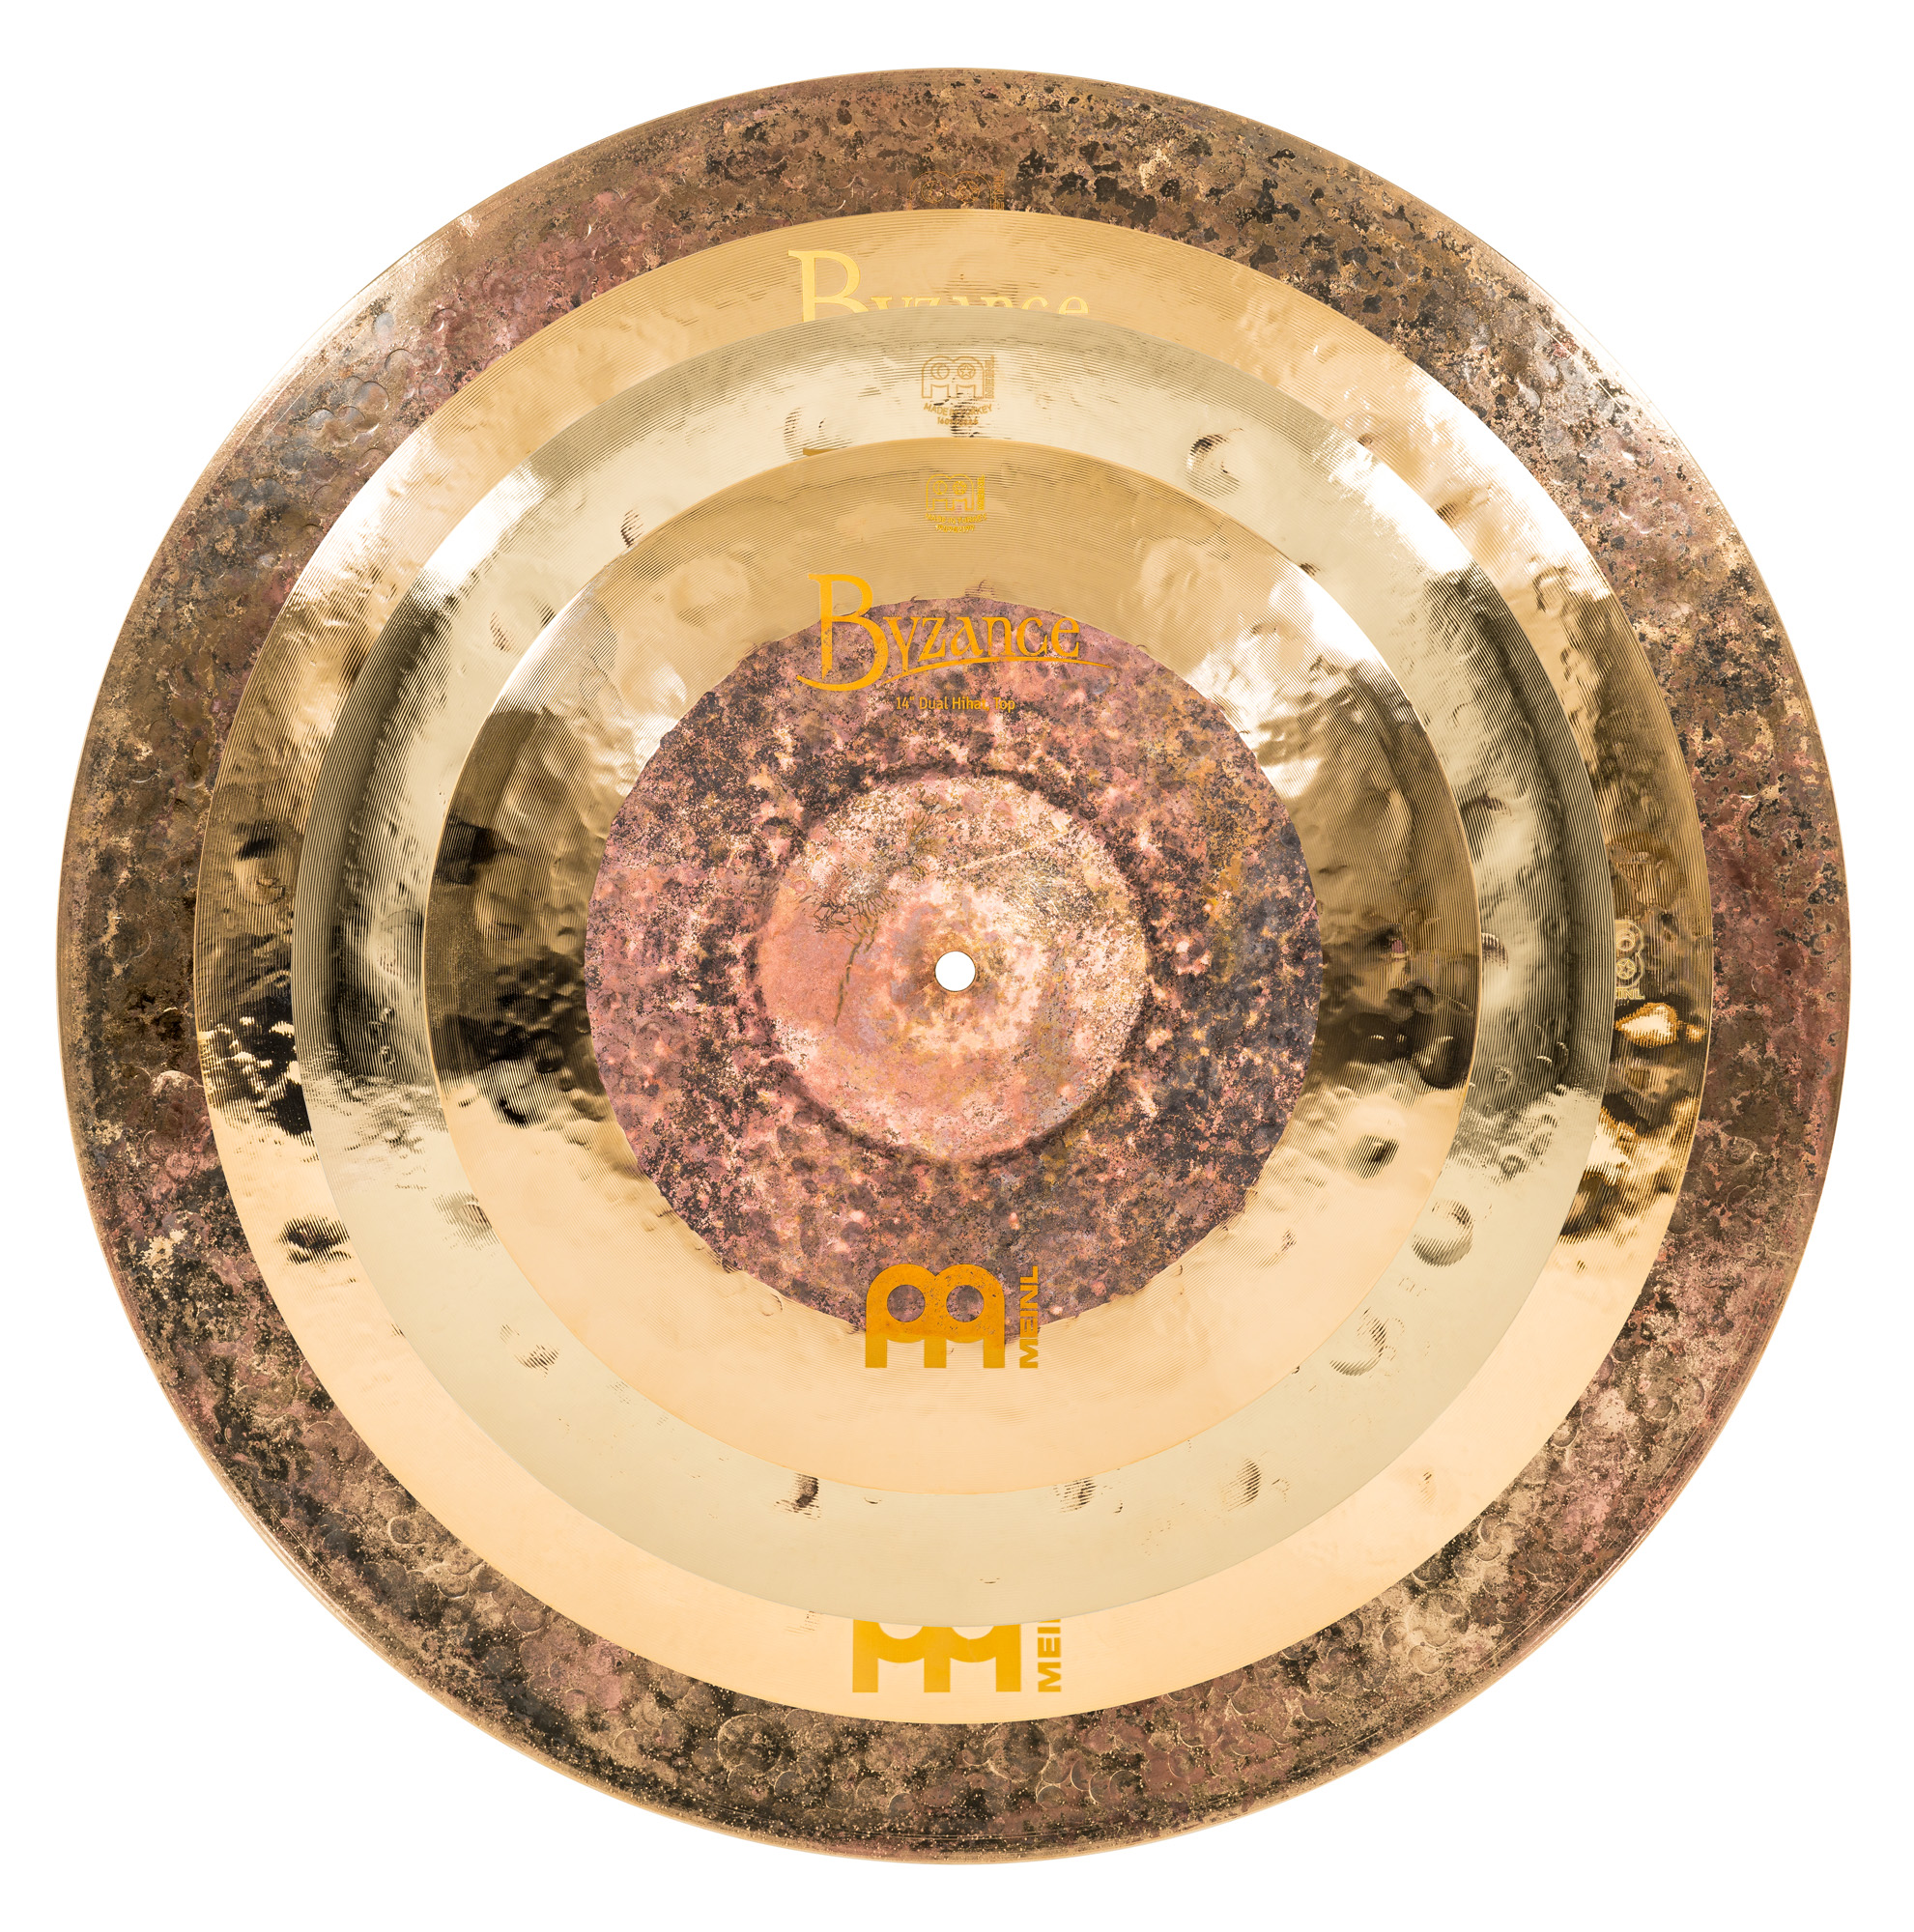 Meinl Byzance Ed Dual Pack 14 16 18 21 - Cymbals set - Variation 6